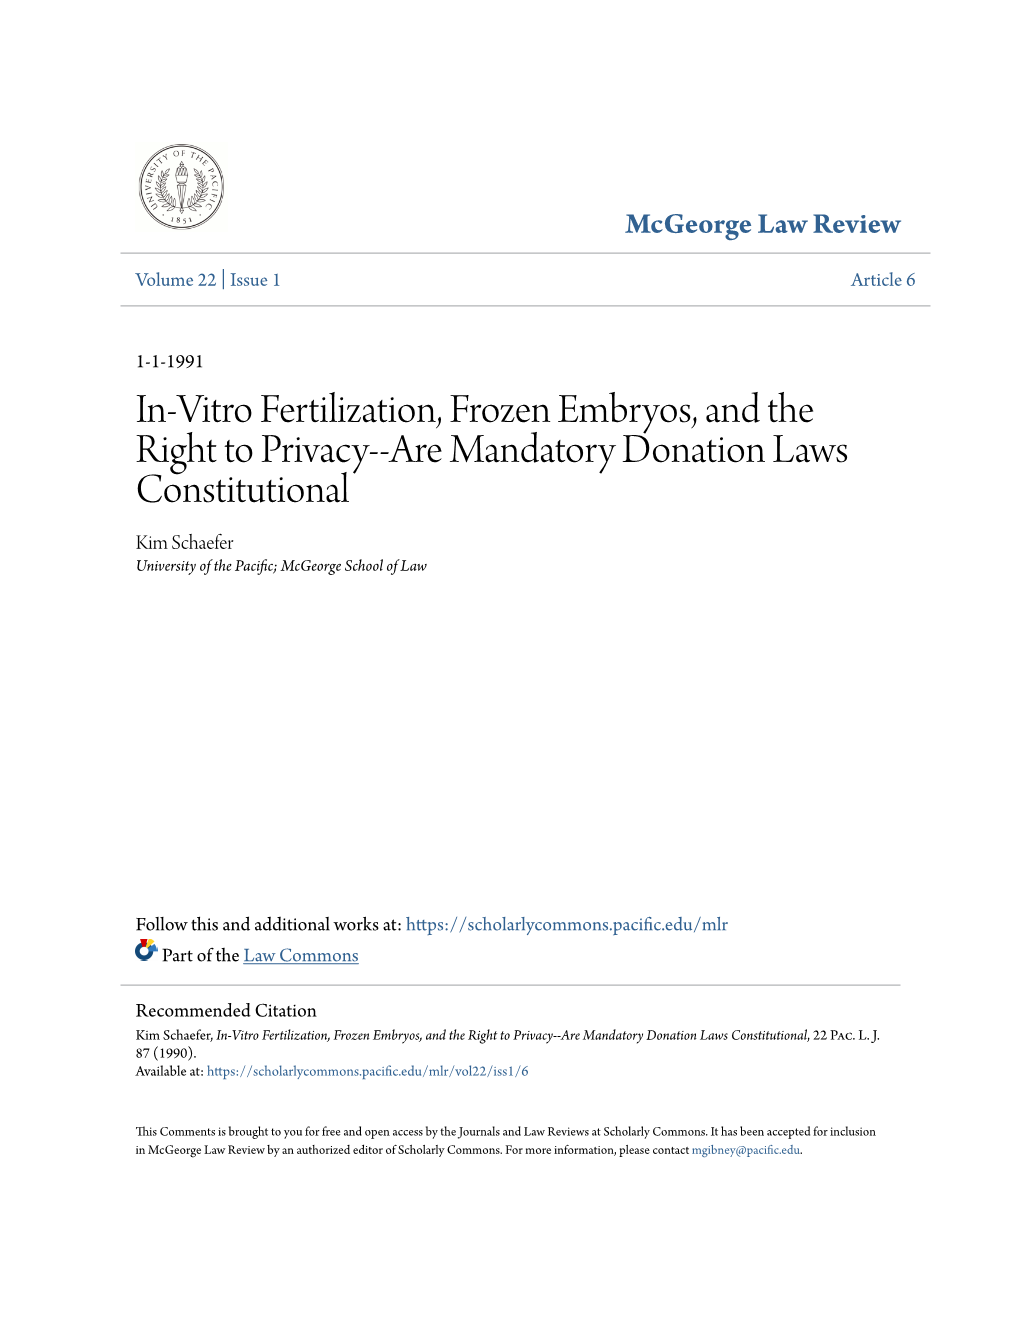 Are Mandatory Donation Laws Constitutional Kim Schaefer University of the Pacific; Cgem Orge School of Law